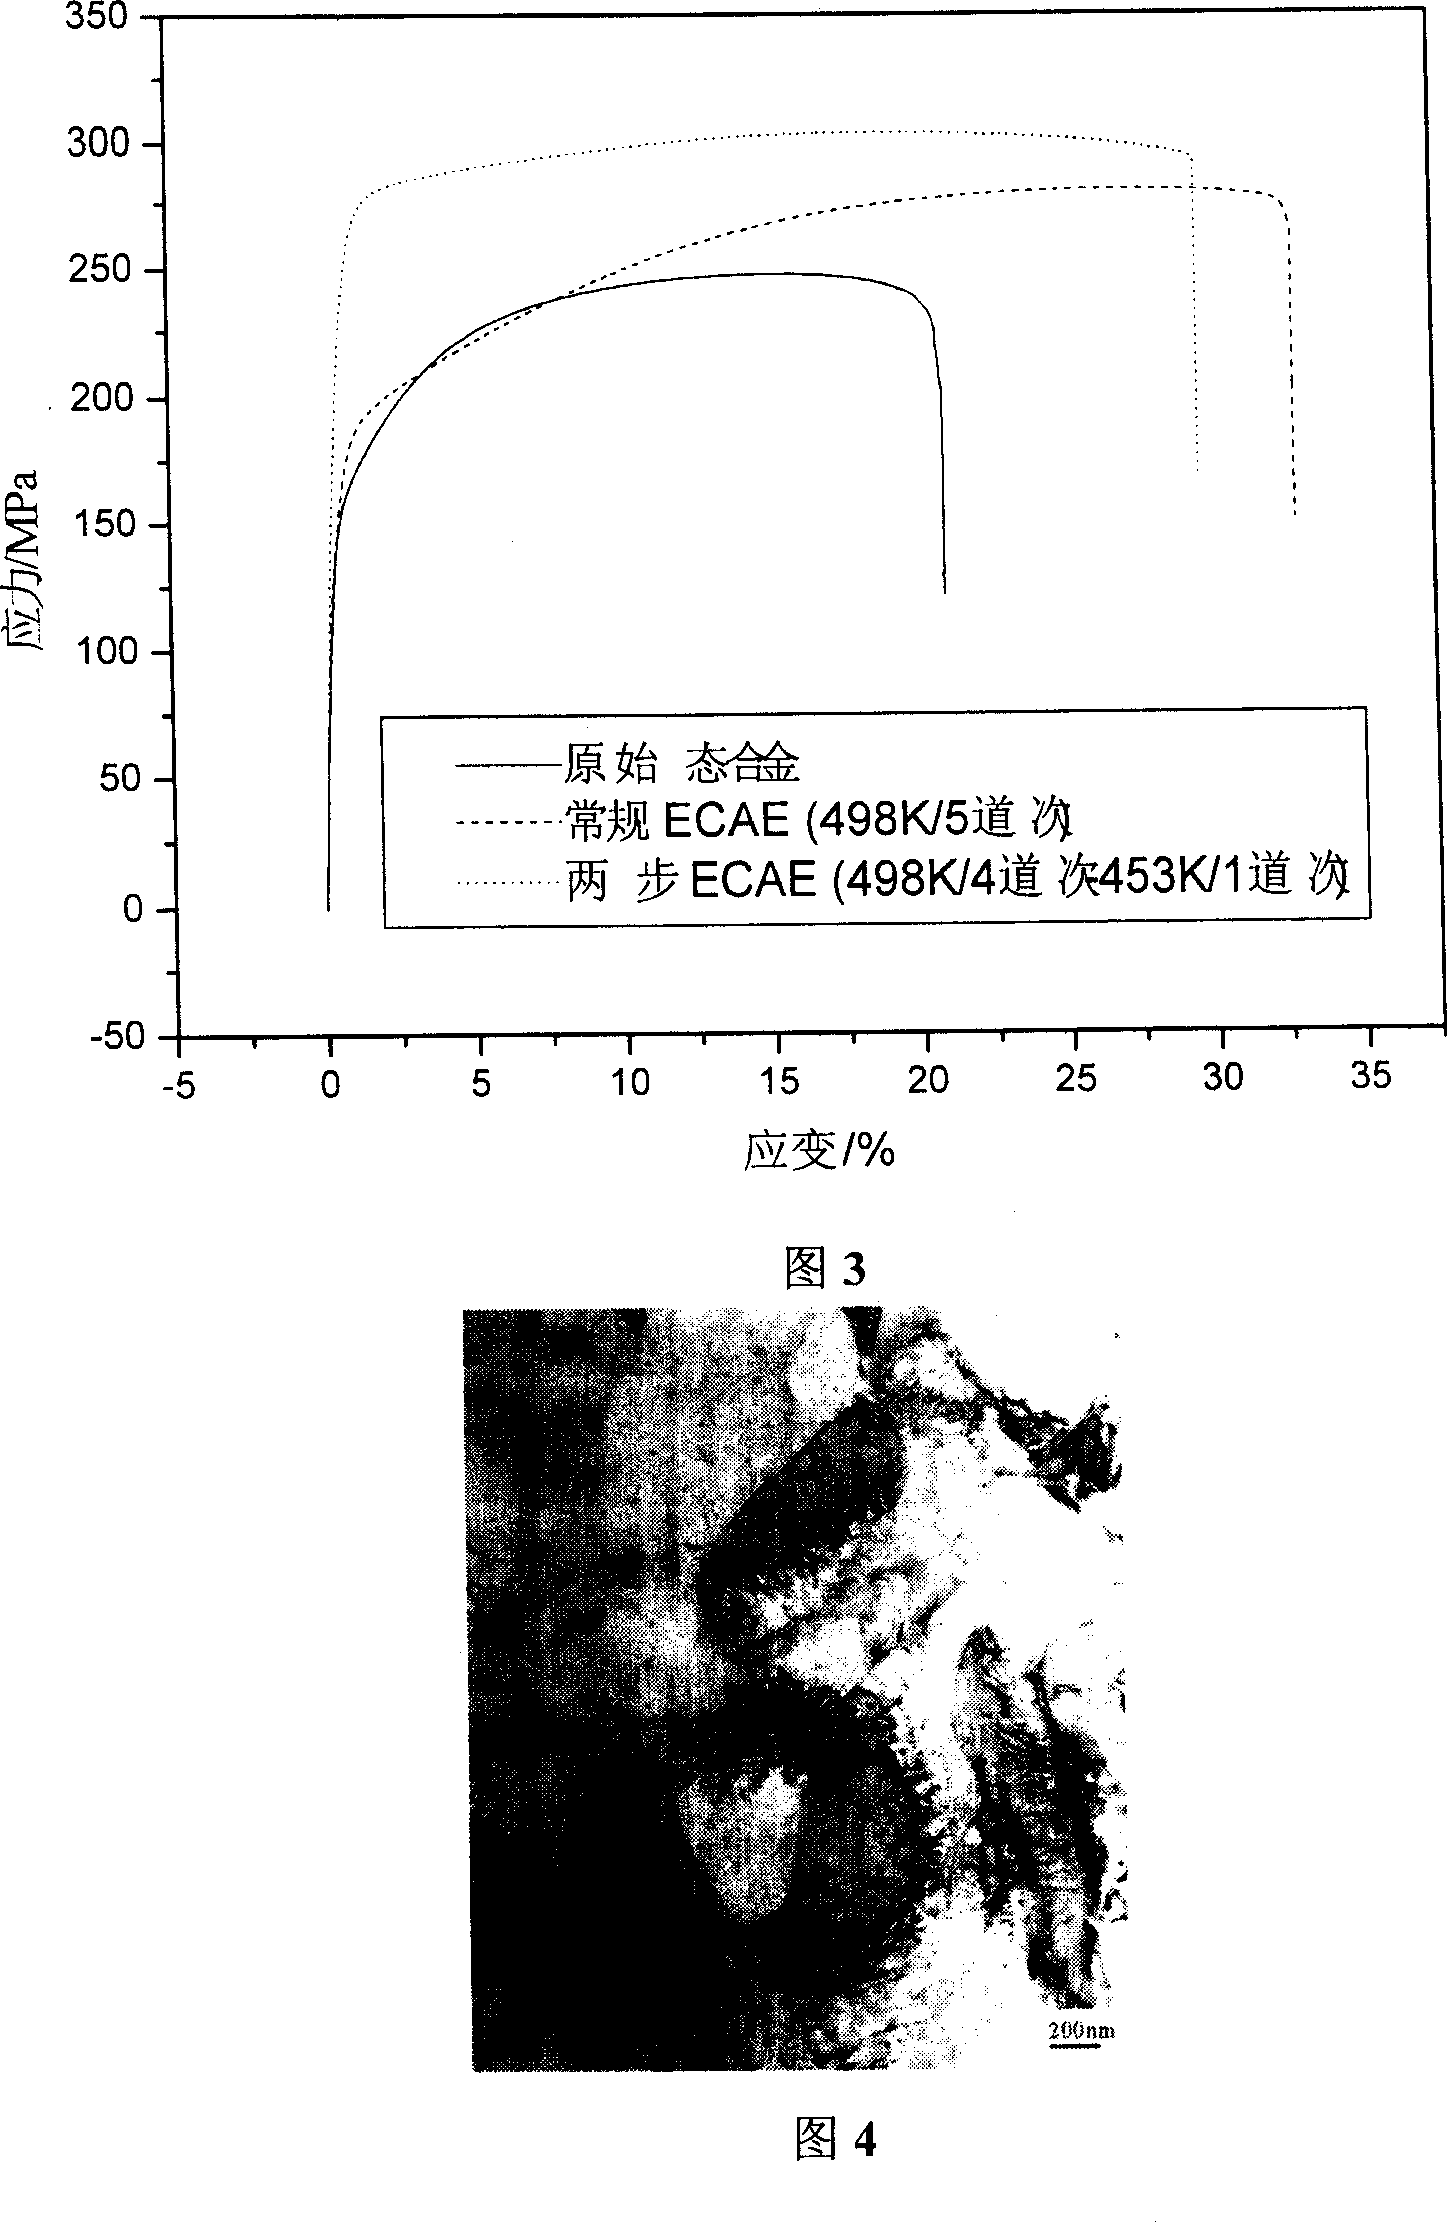 Method for extrusion two-step equal channel angle of magnesium alloy